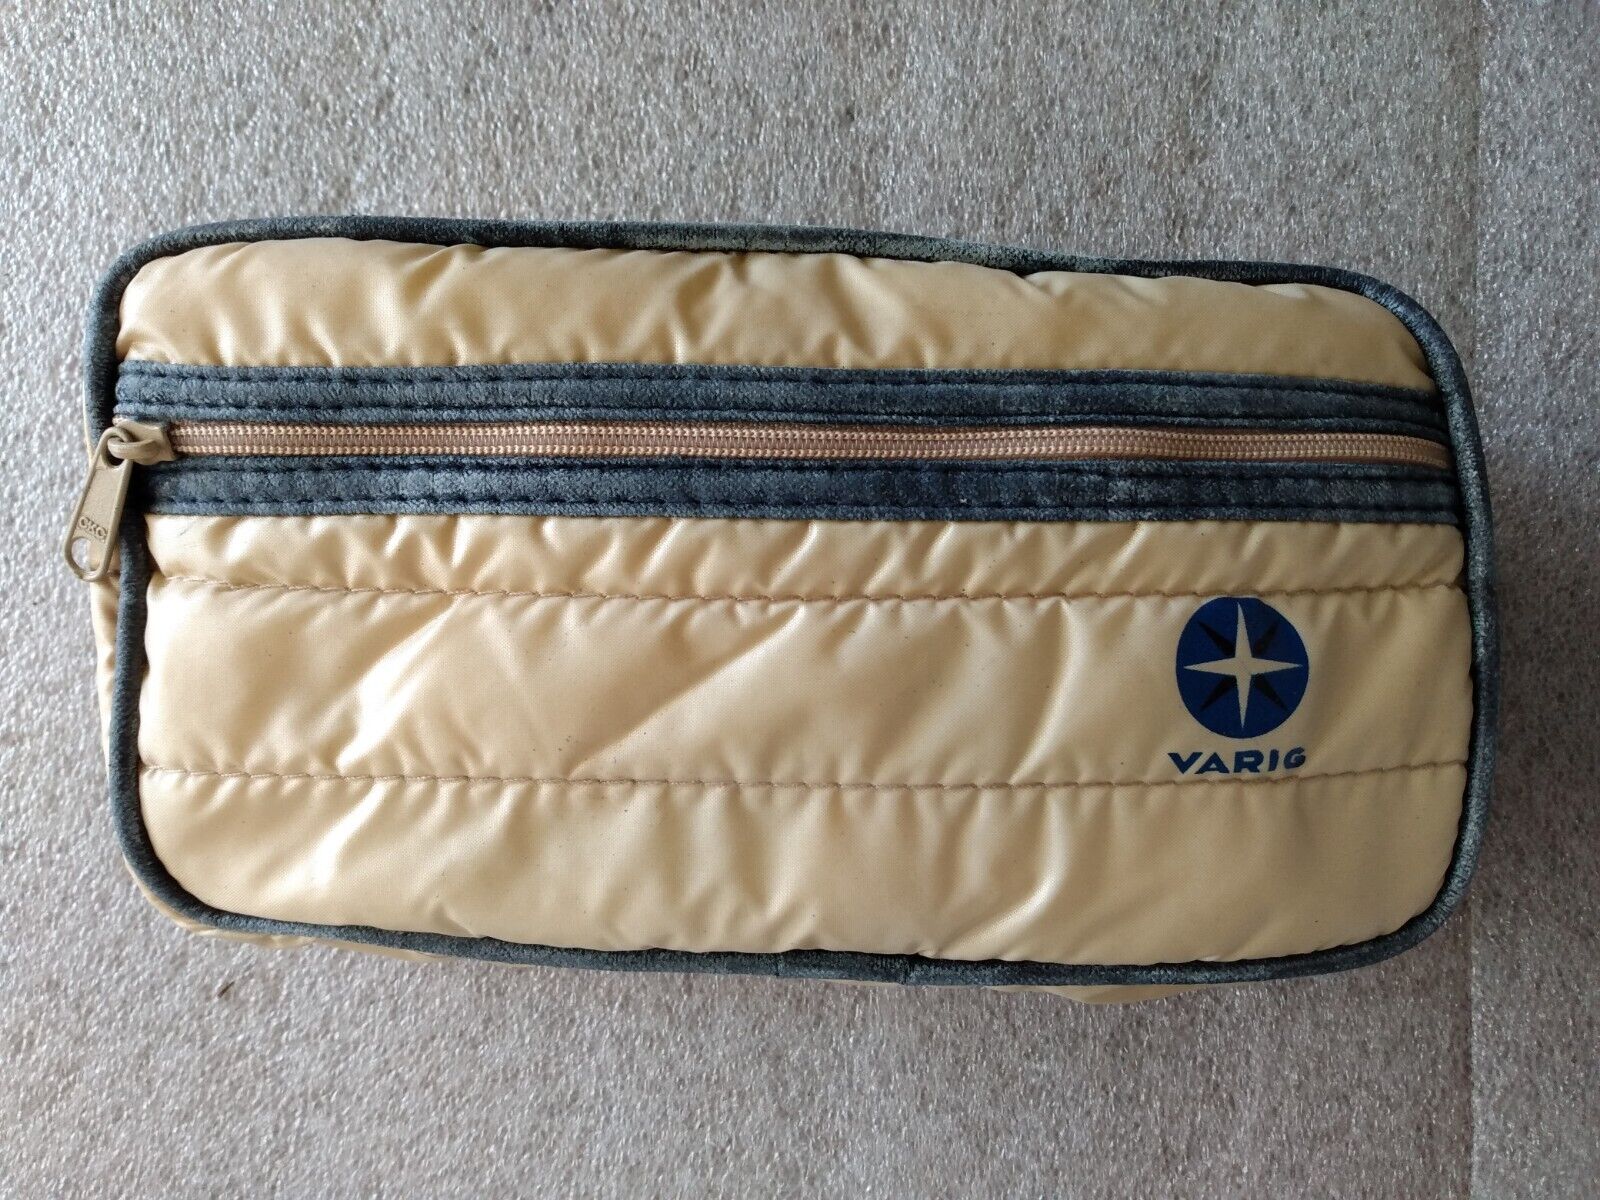 1960s Varig Airlines 1st Class Full Toiletry Bag w/ Hermes Cologne & Lotion